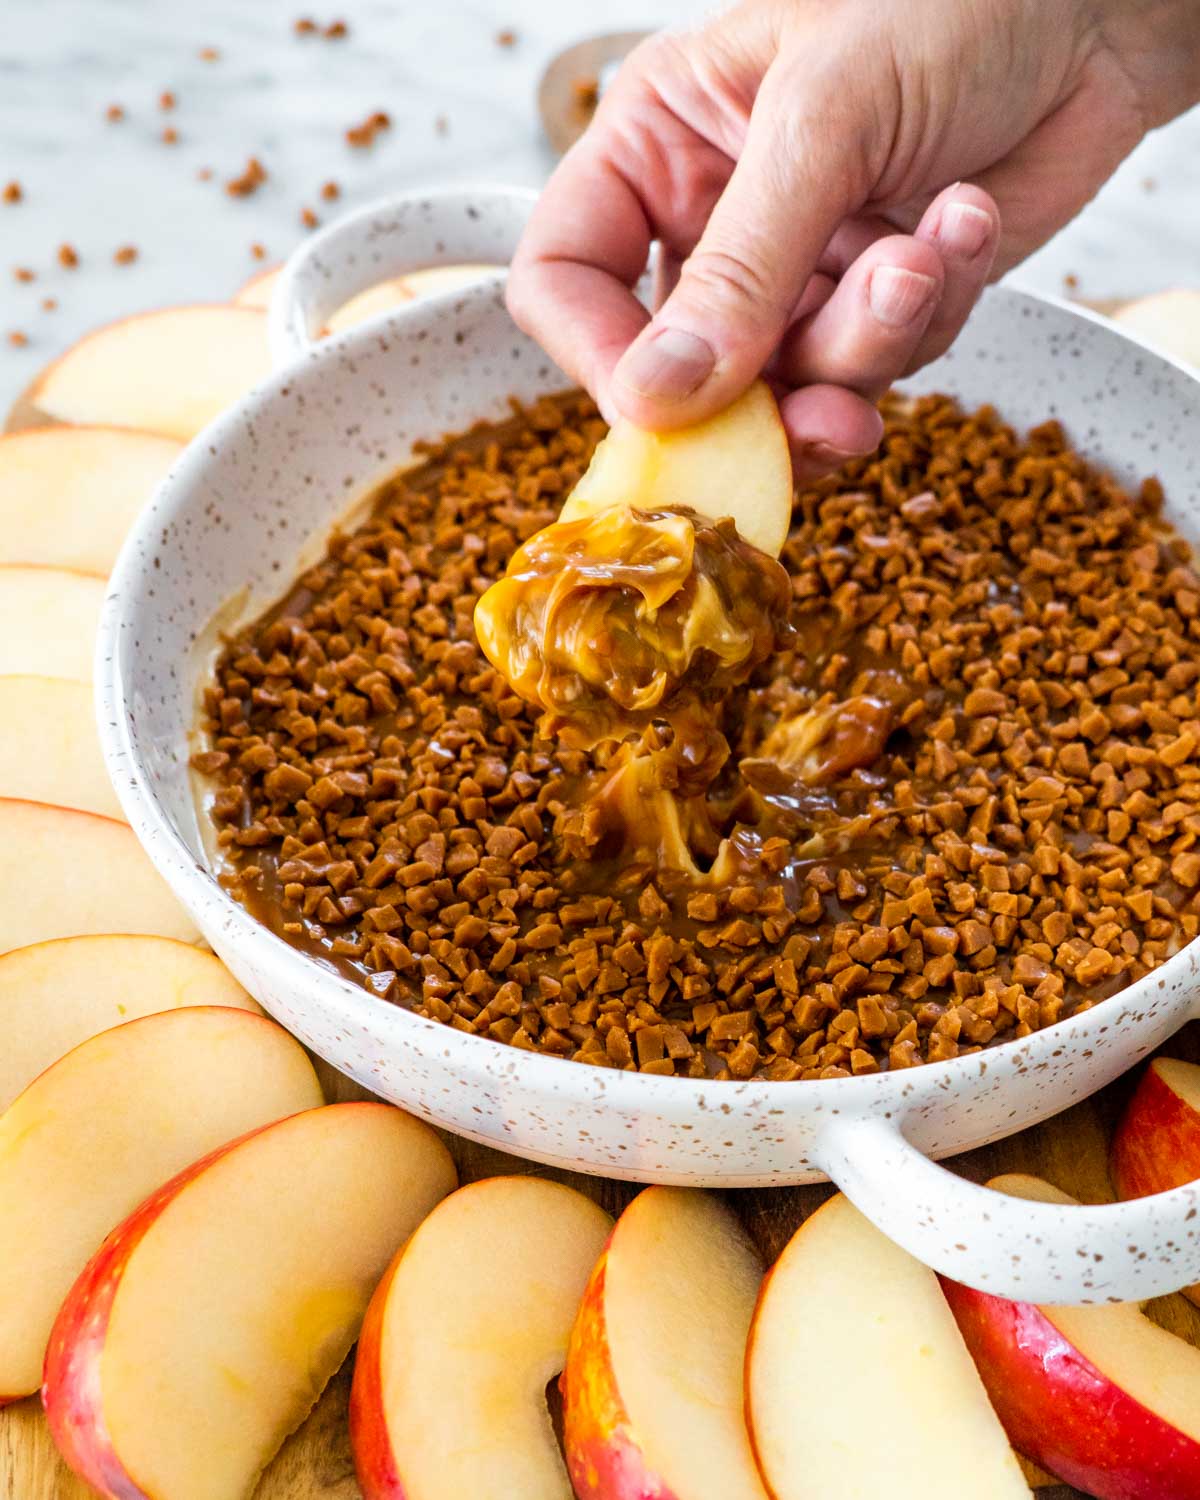 sideview shot of a hand dipping an apple wedge in caramel apple dip